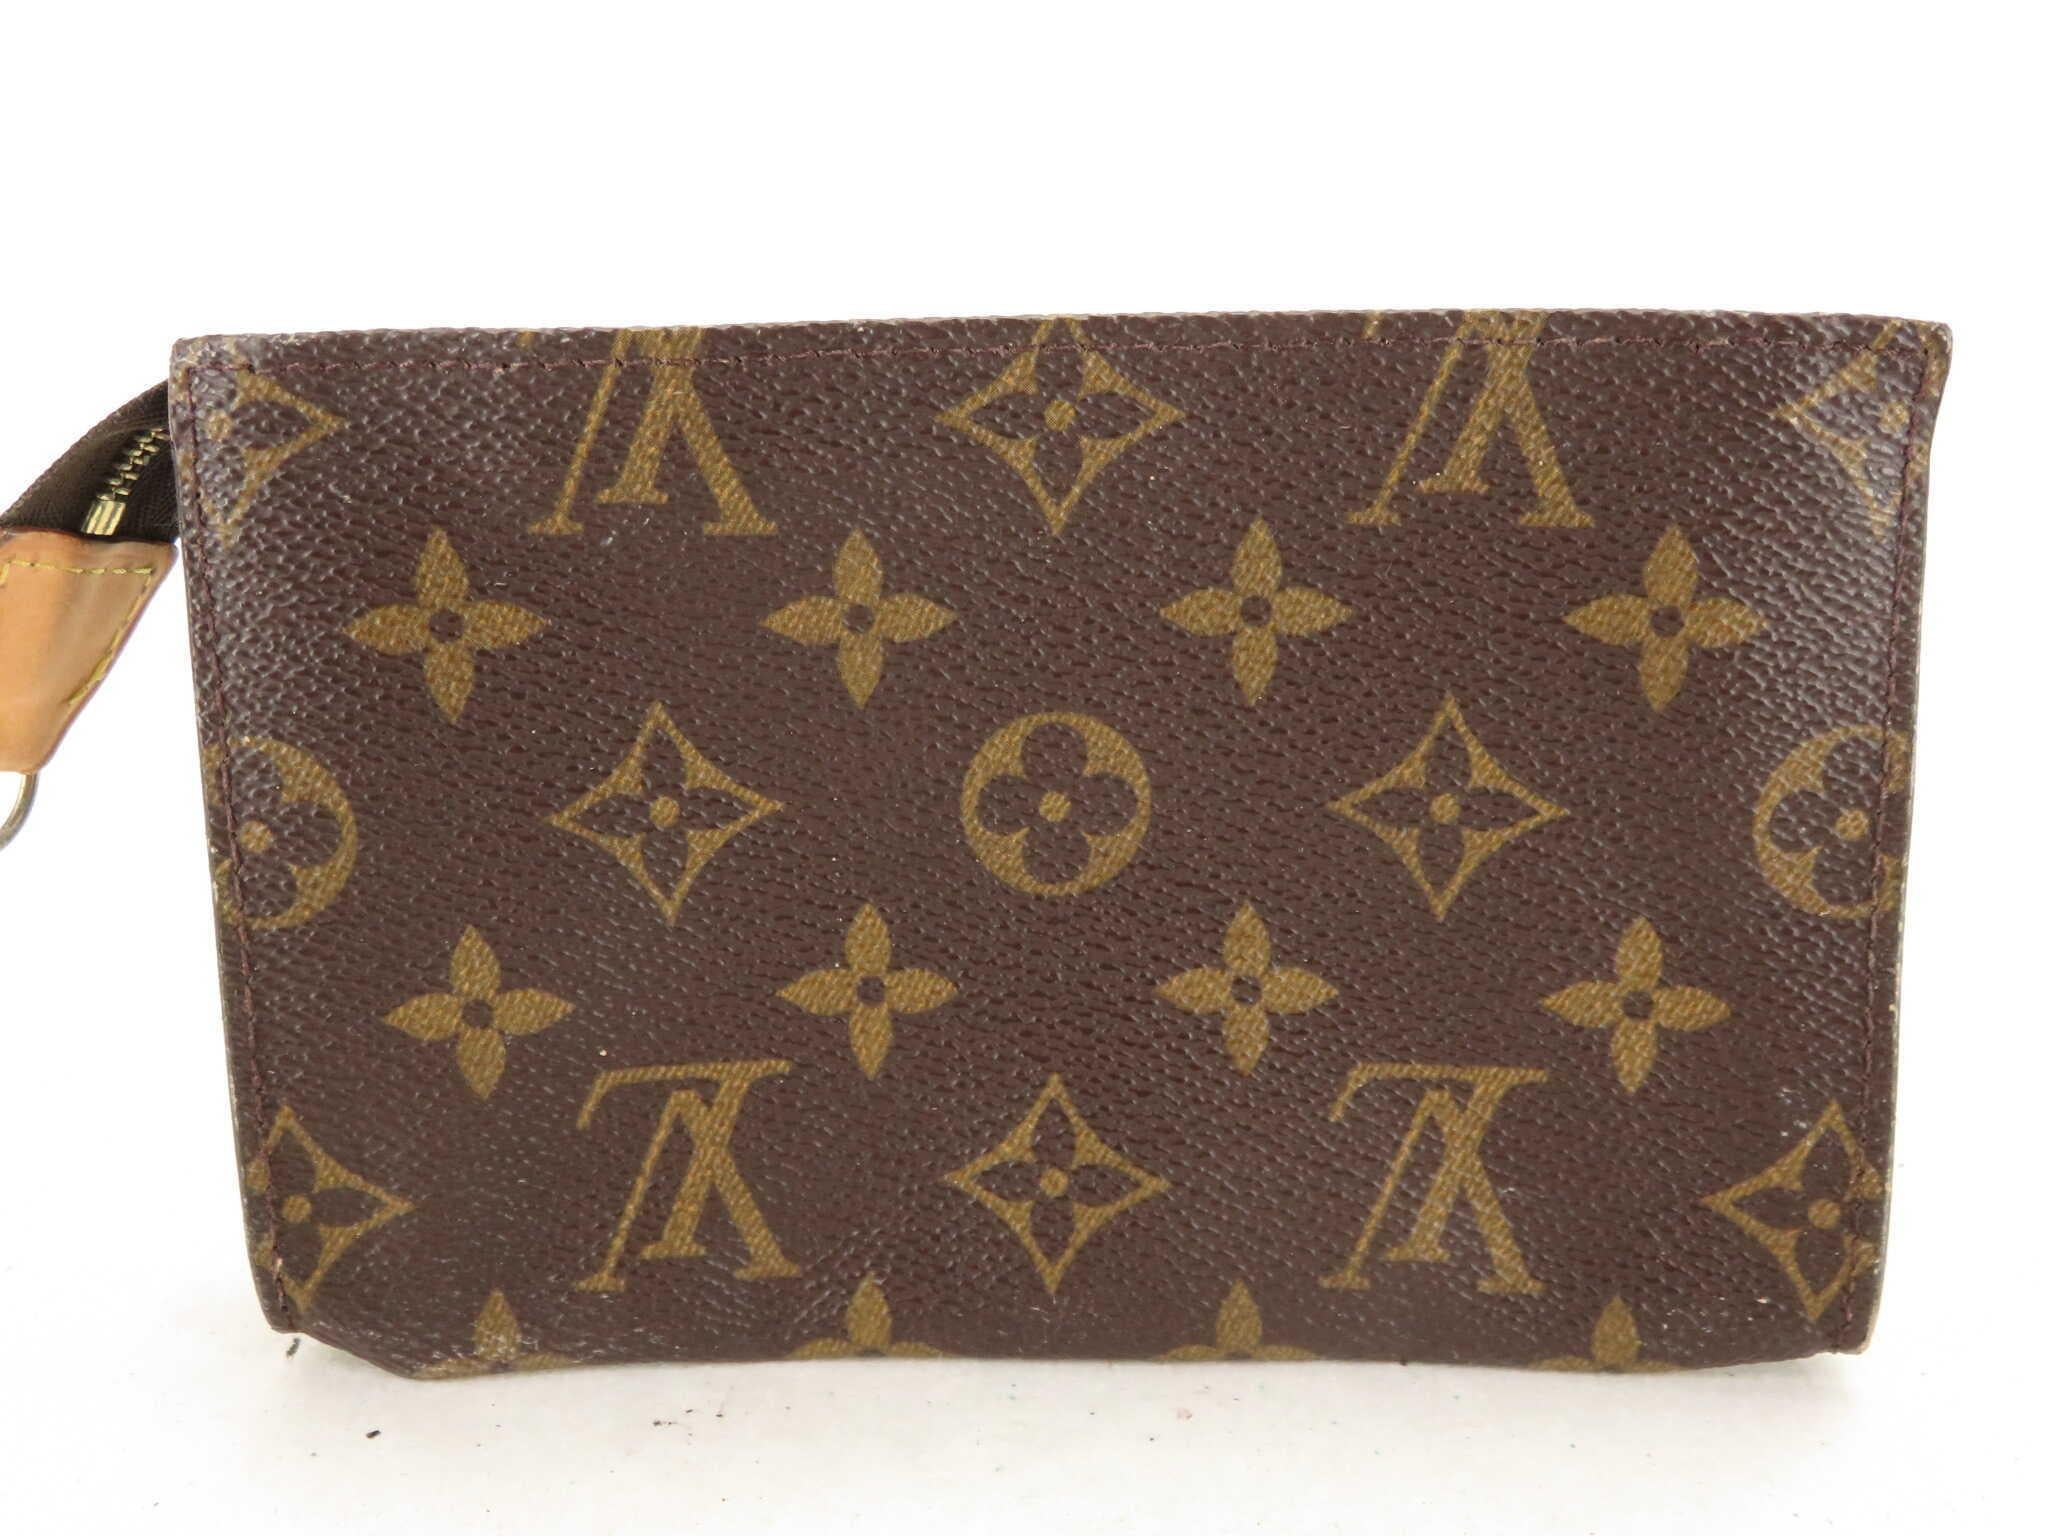 Brown and tan monogram coated canvas Louis Vuitton Toiletry Pouch 15 cm with gold-tone hardware, tan vachetta leather trim, creme leather lining and zip closure at top.
 

66537MSC

Height: 4.75